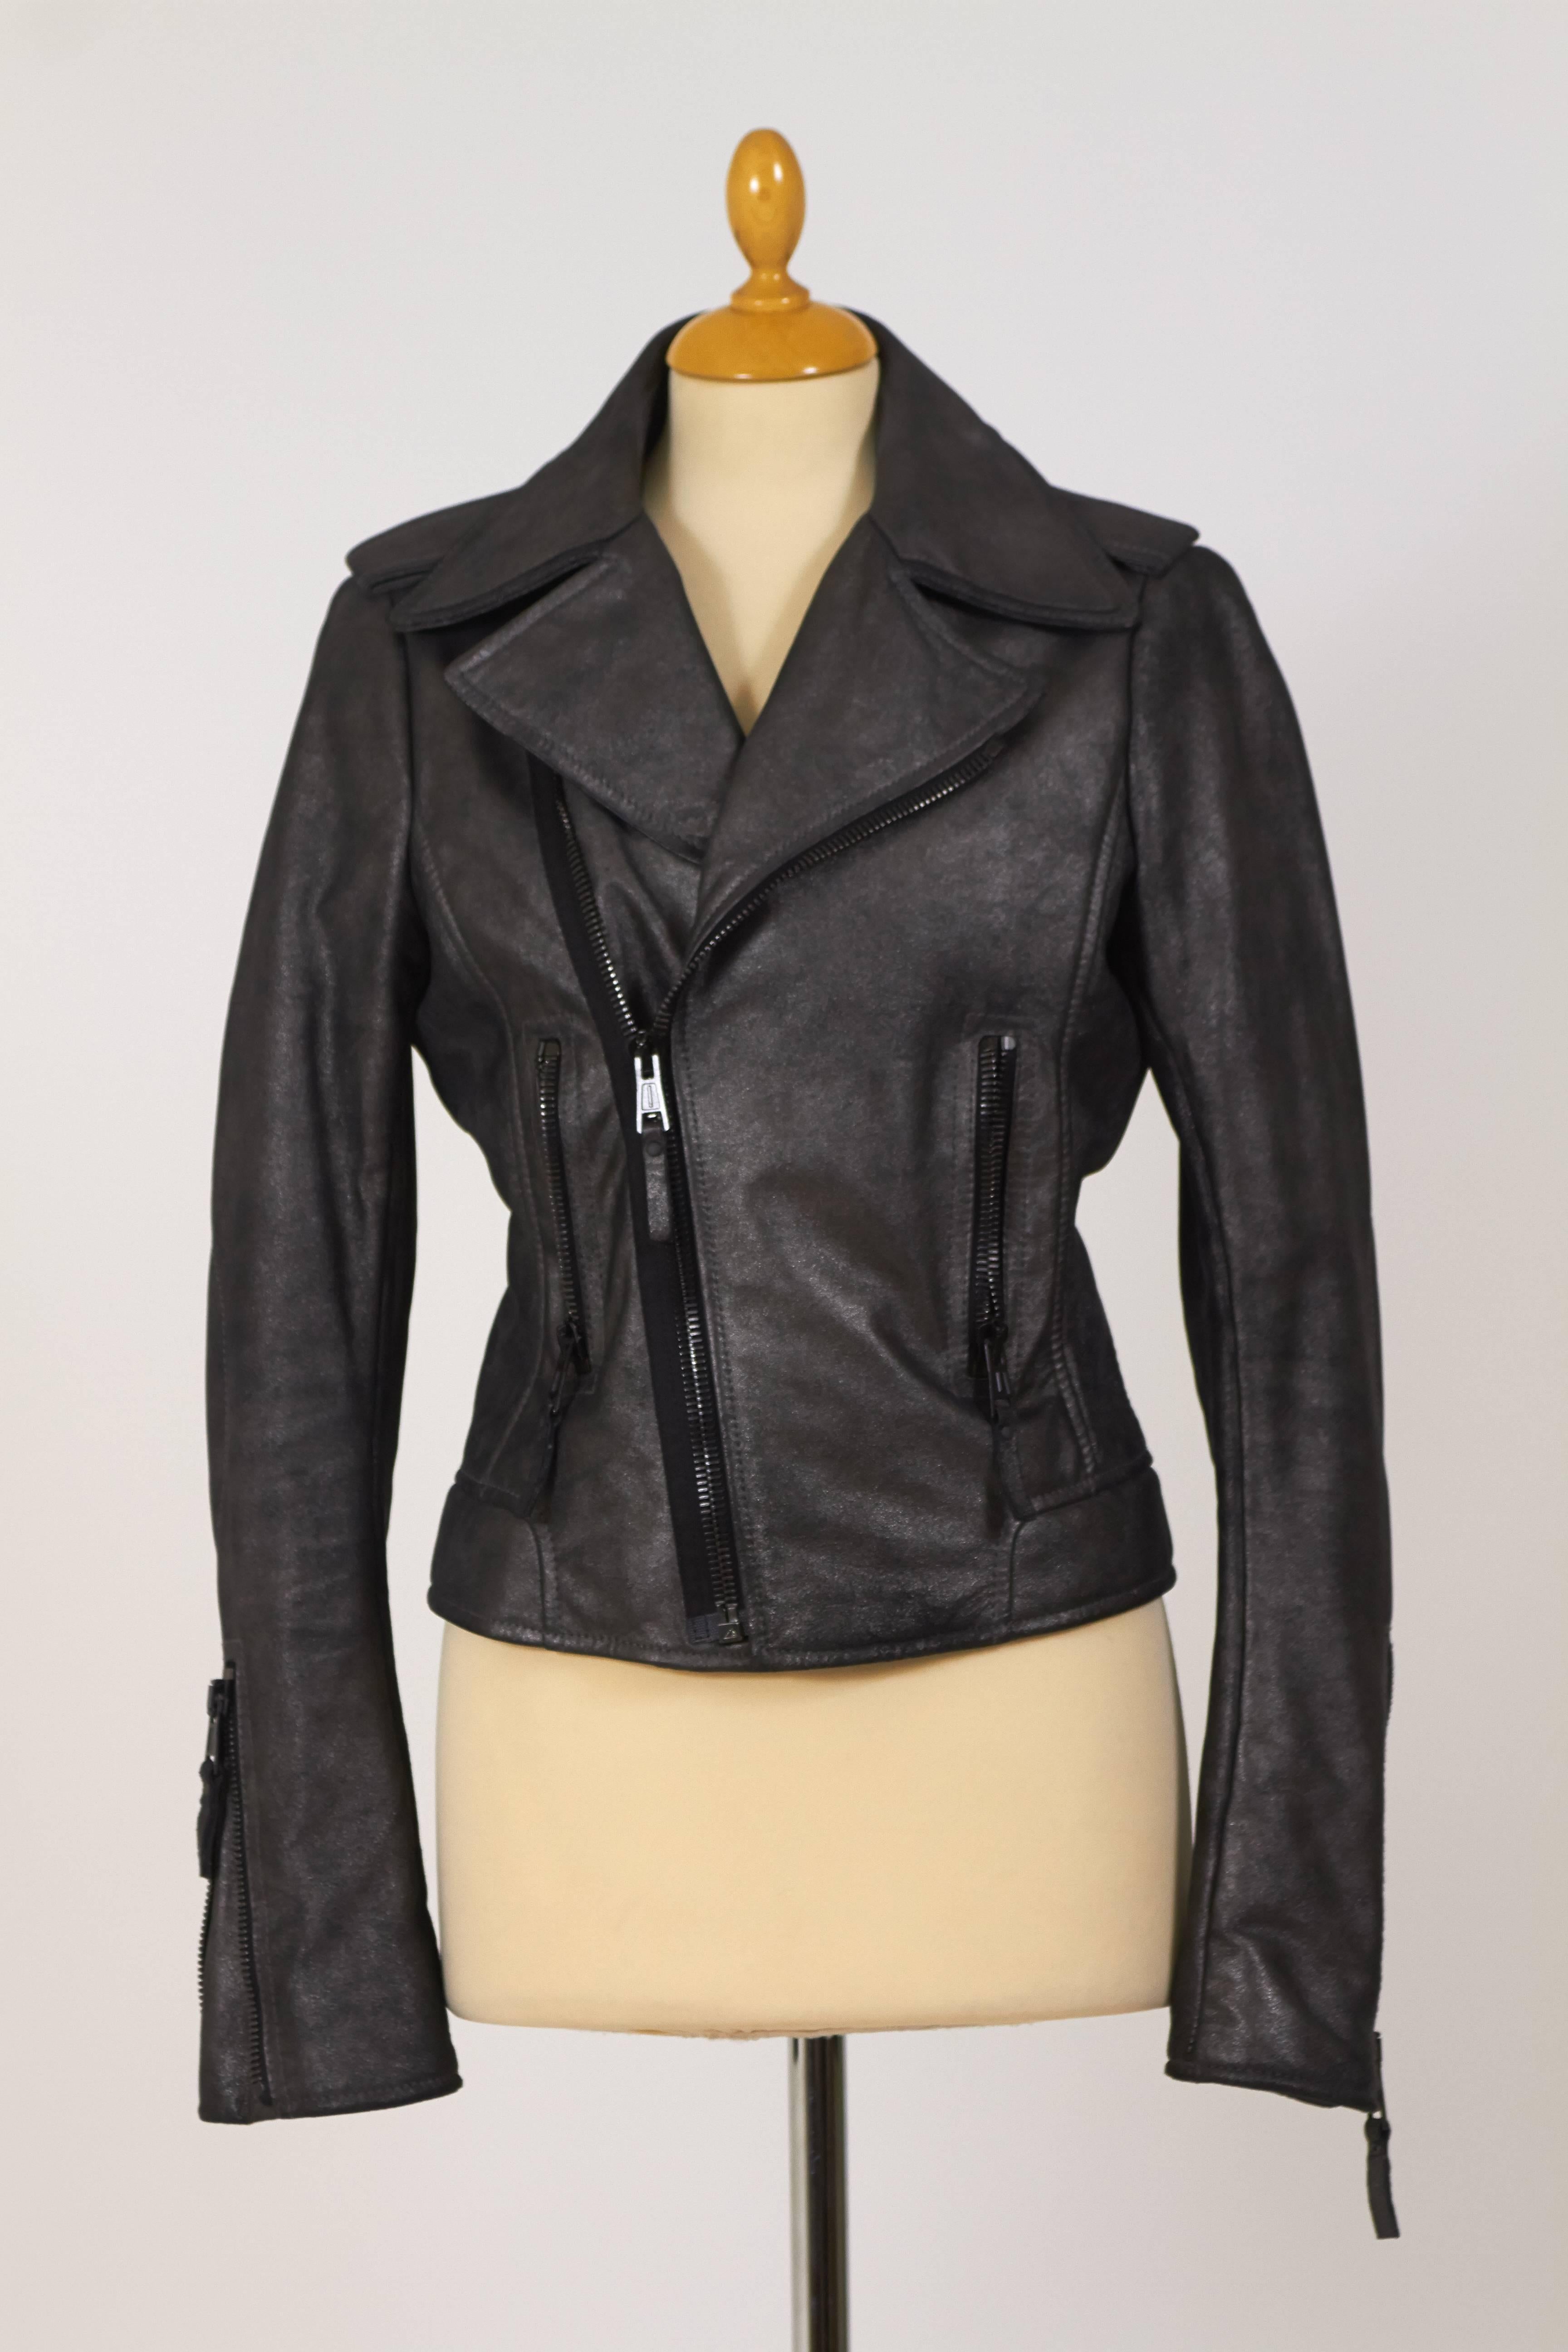 This amazing motorcycle style jacket is in a dark metallised gray leather. It has zip pockets and closure. It's fully lined with black satin. 

Measurement:
Label size 40 Italian
Estimeted size S/M
Shoulder 15 inch
Bust 34 inch
Waist 32